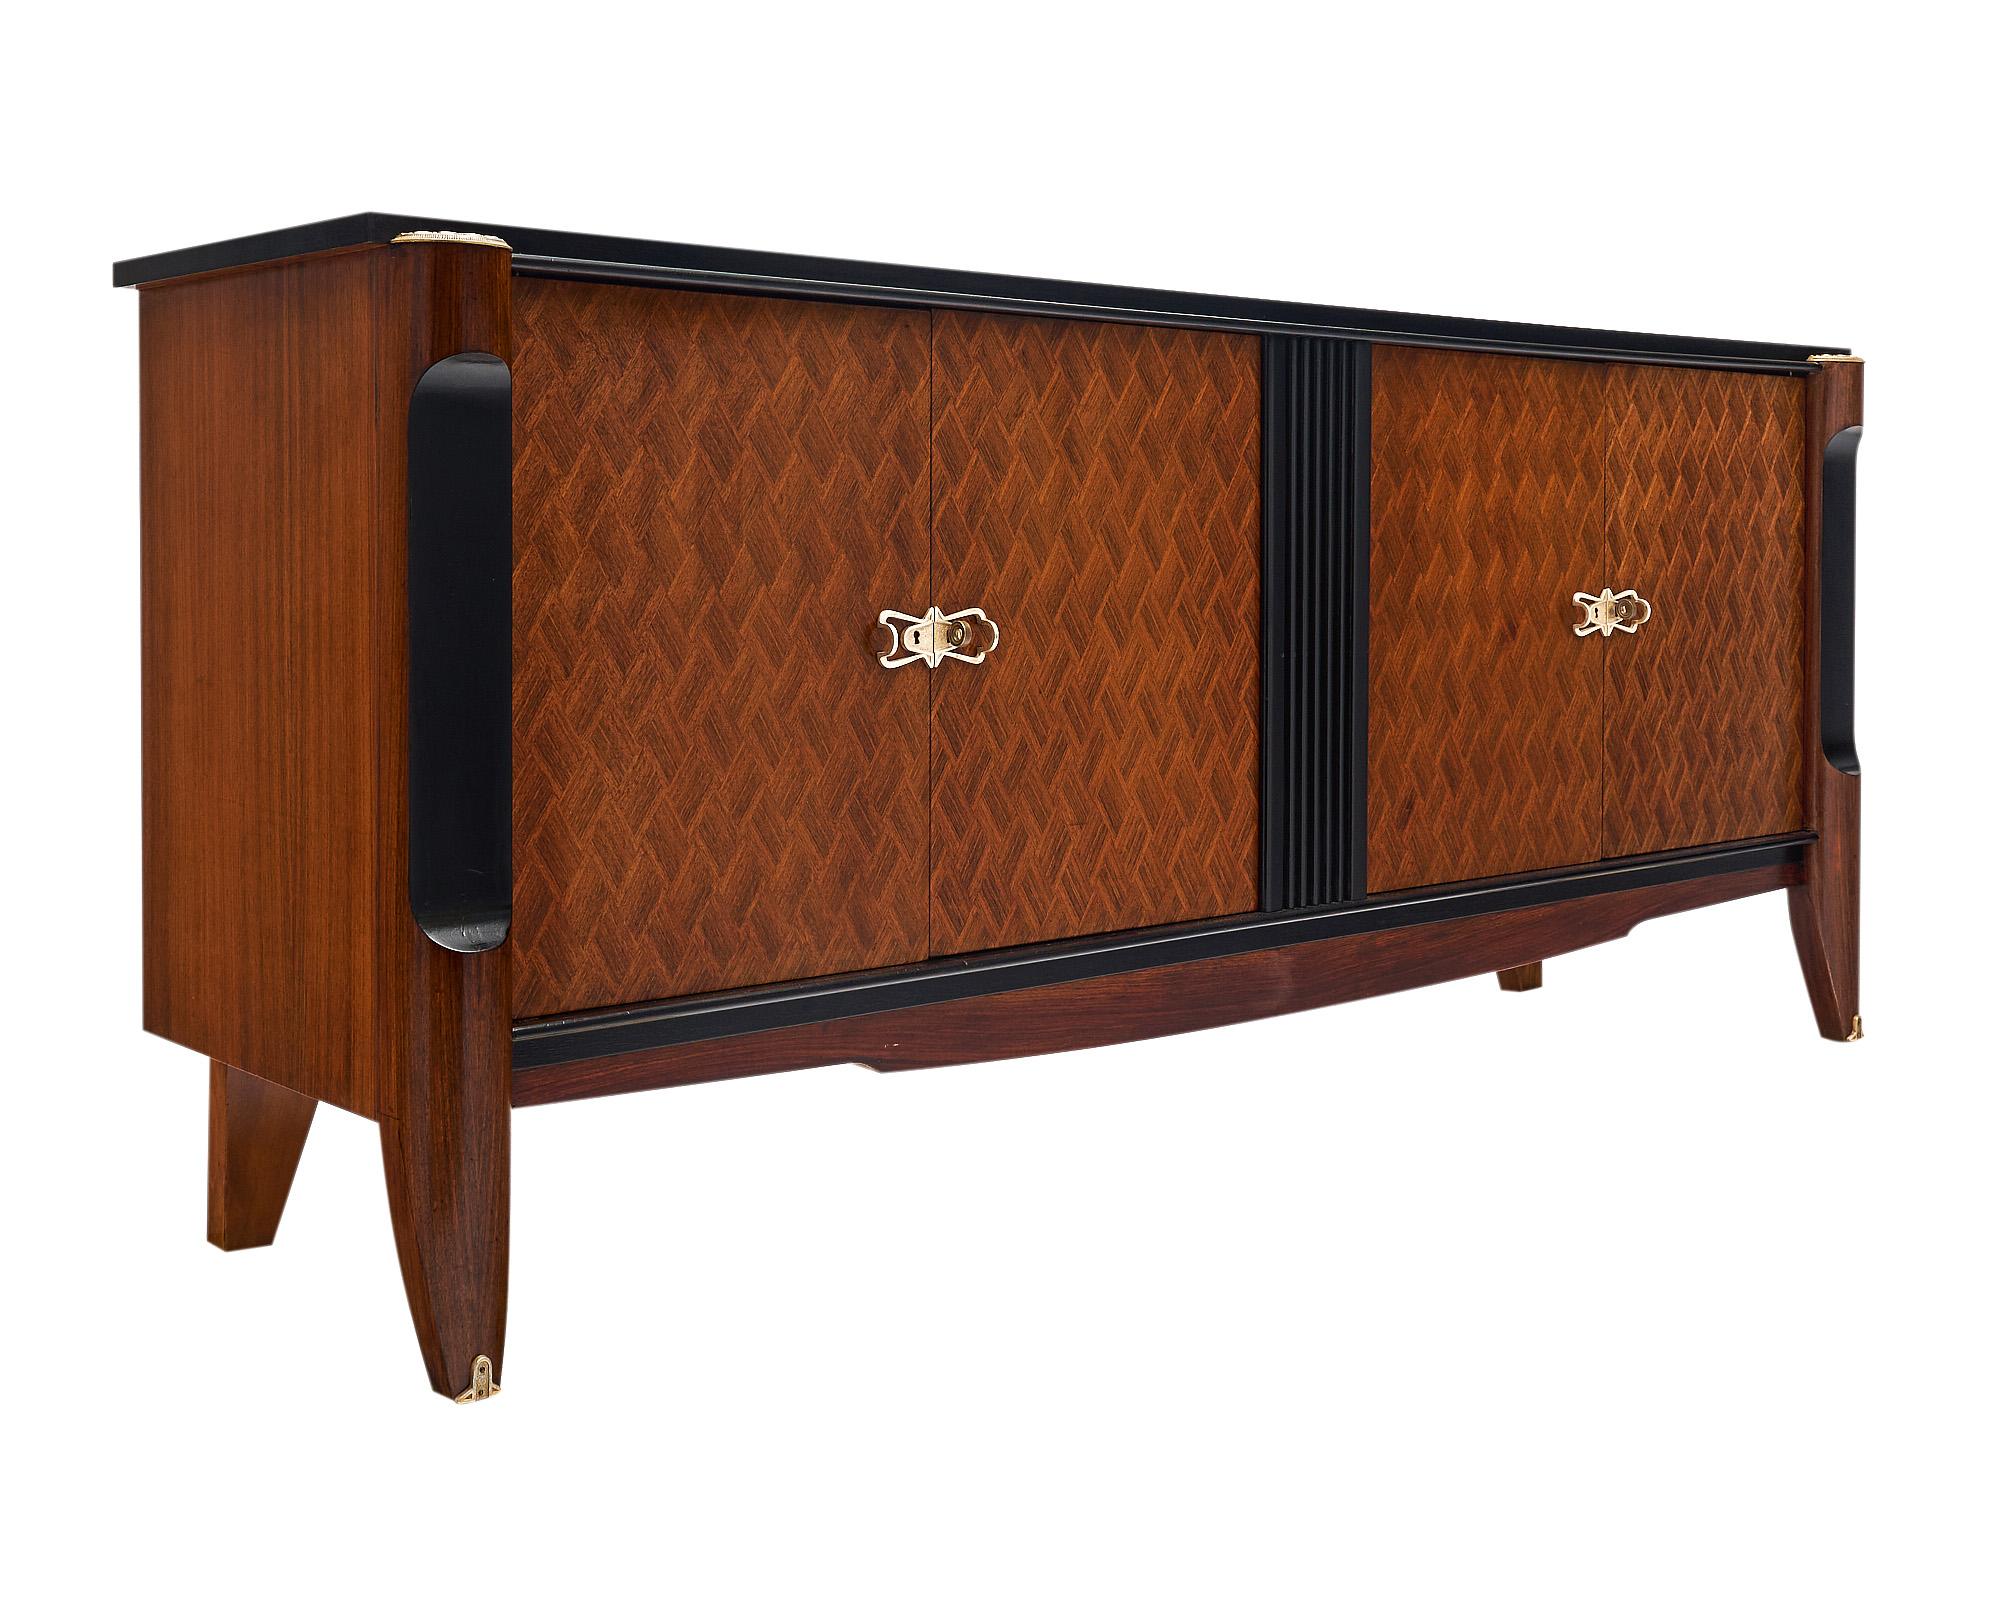 Buffet, in the Art Deco style from France. This piece features a beautiful chevron patterned parquetry across the four doors and ebonized details throughout. The doors and legs have the original gilt brass hardware. The four doors open to reveal